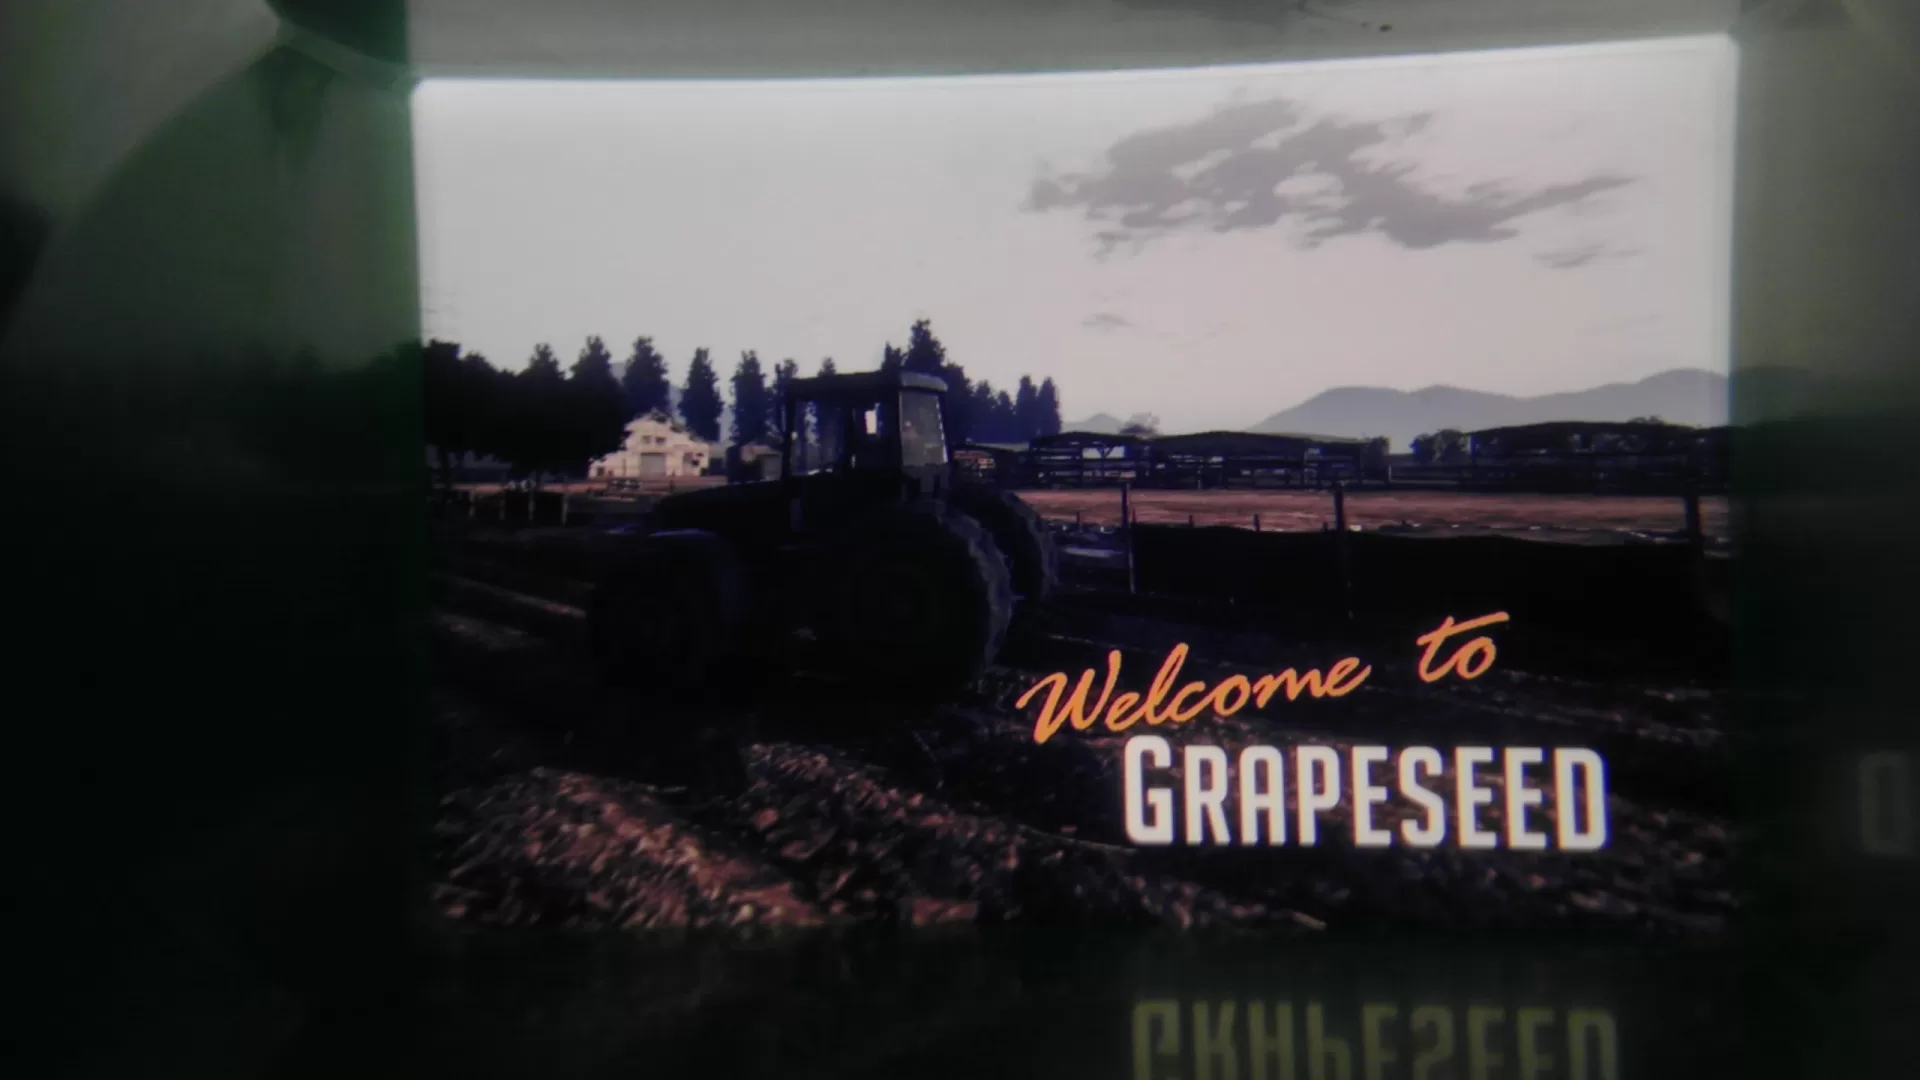 Grand Theft Auto 5 - Welcome to grapeseed